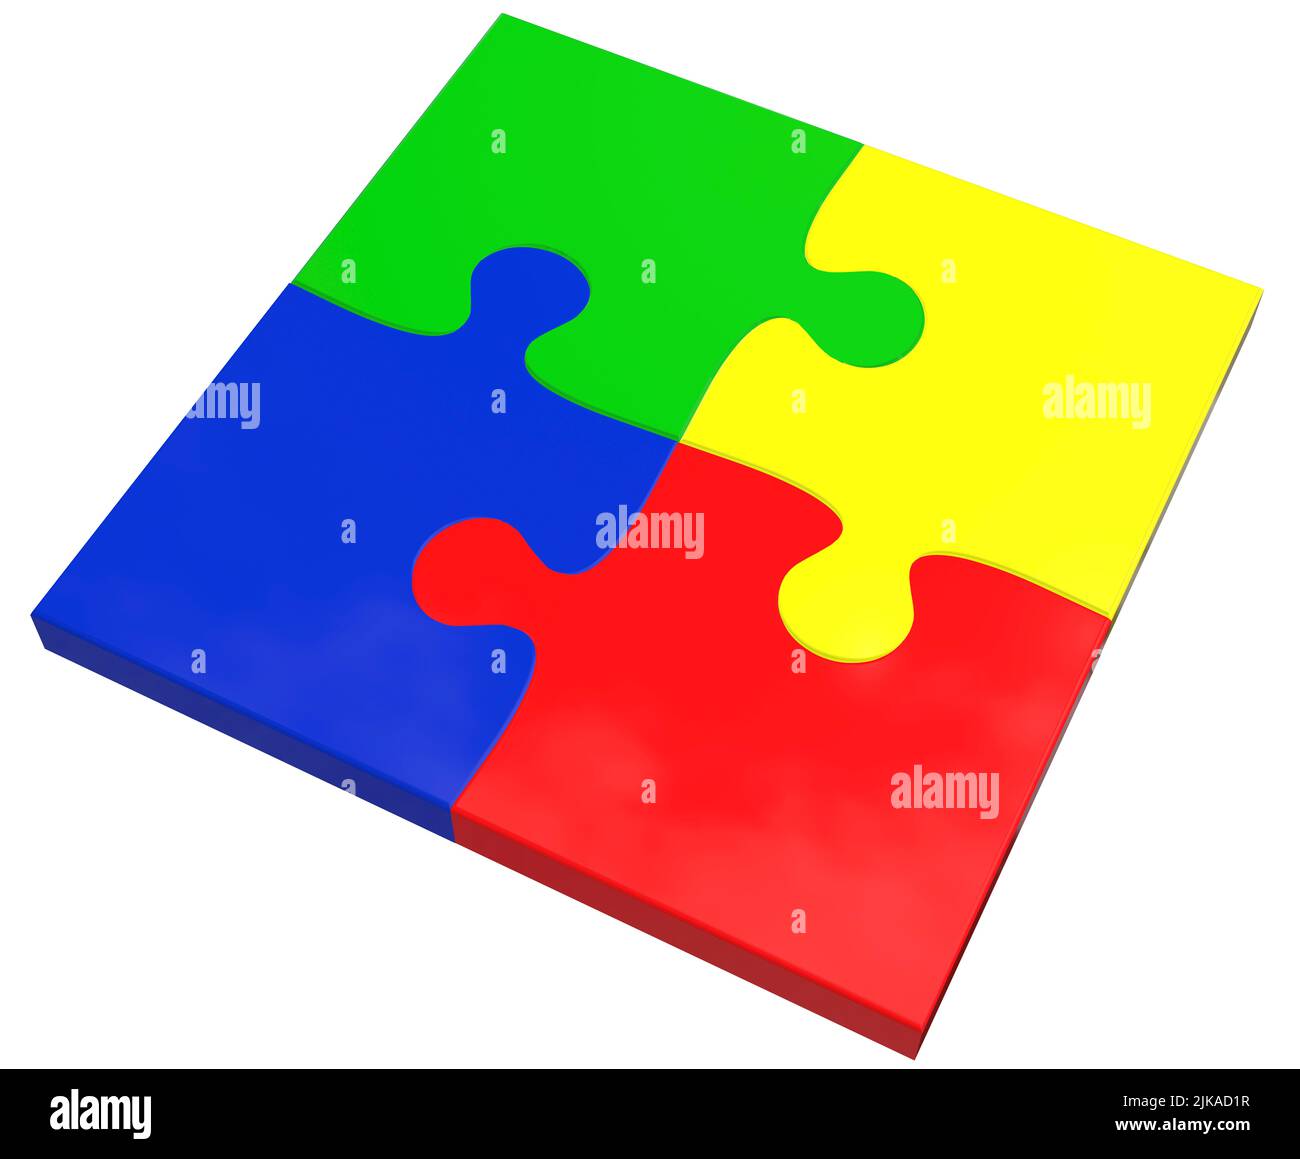 blank jigsaw representing linked concept joined up concept collaboration alliance or coalition concept Stock Photo